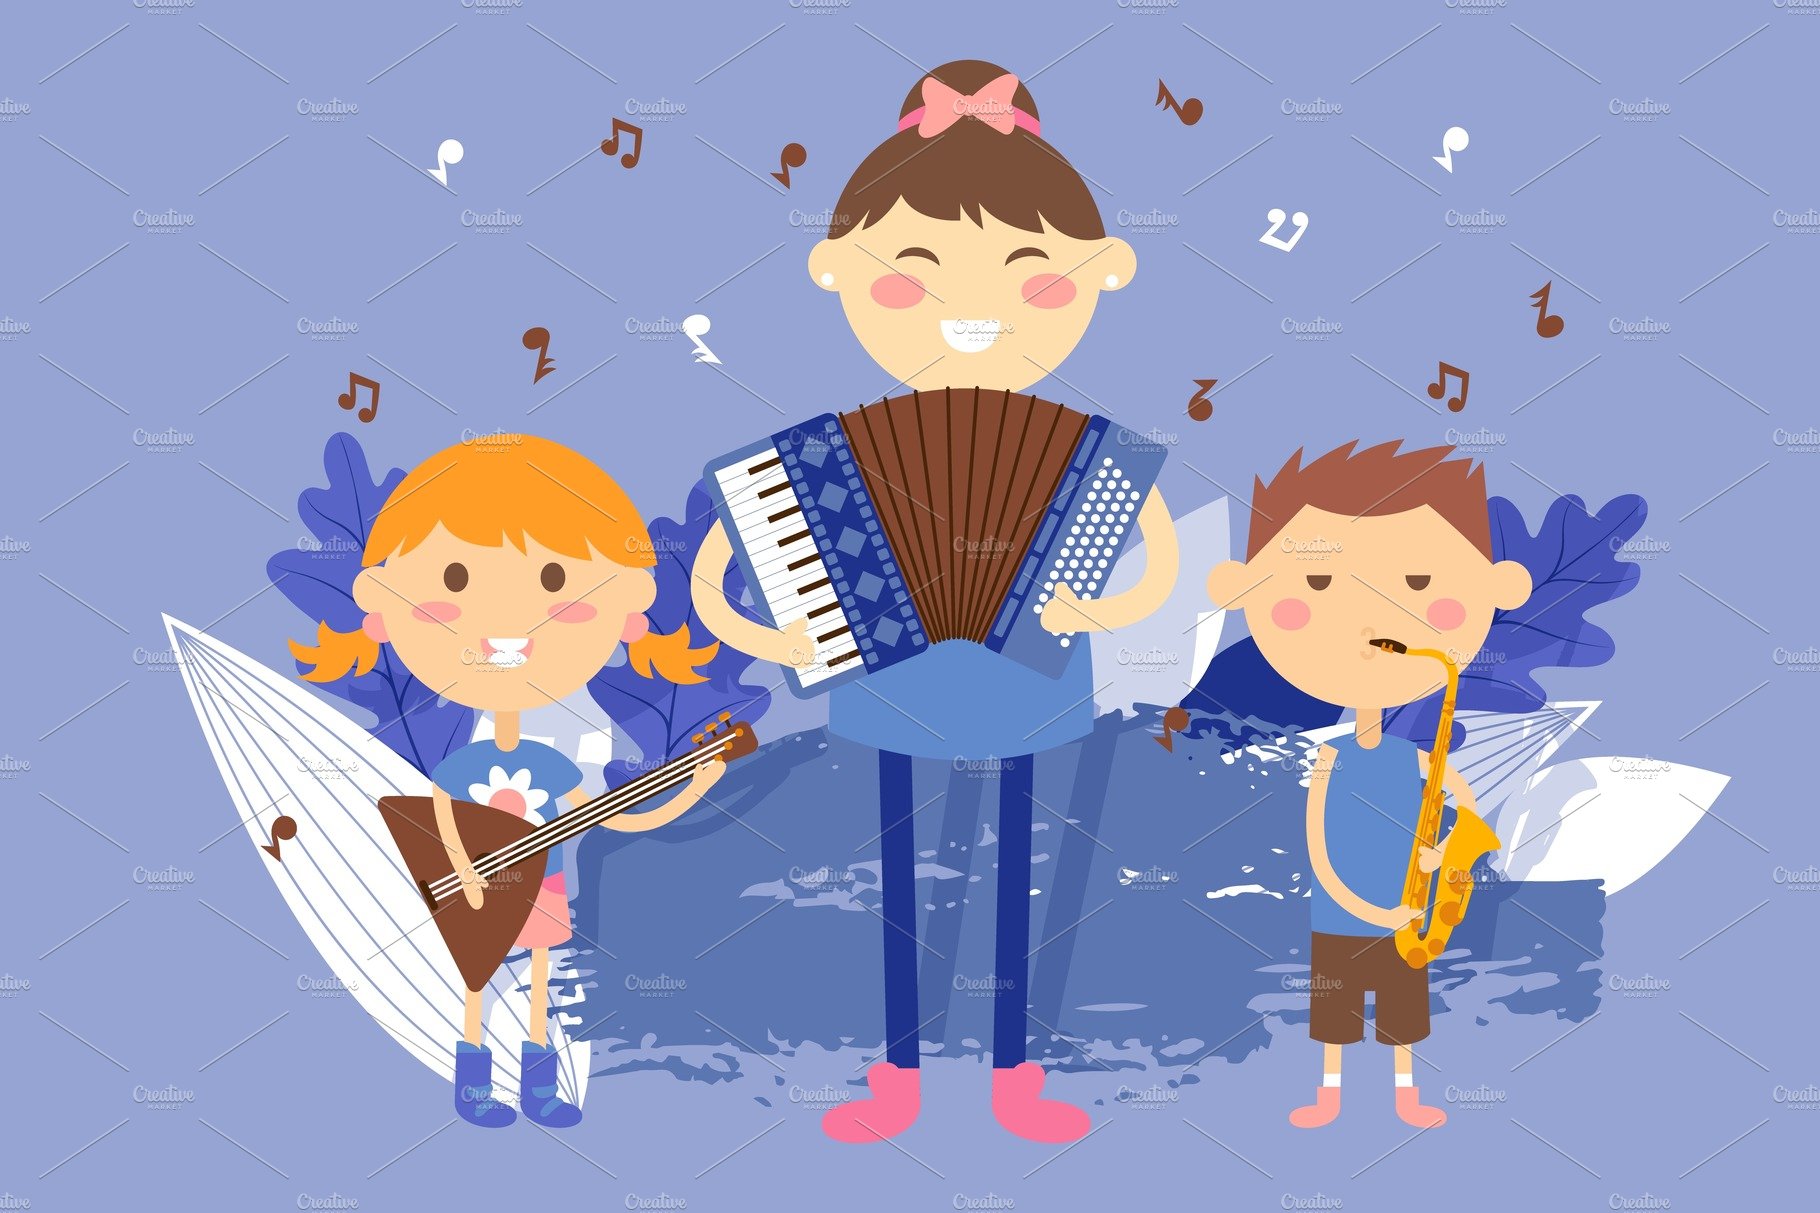 Children playing musical instruments cover image.